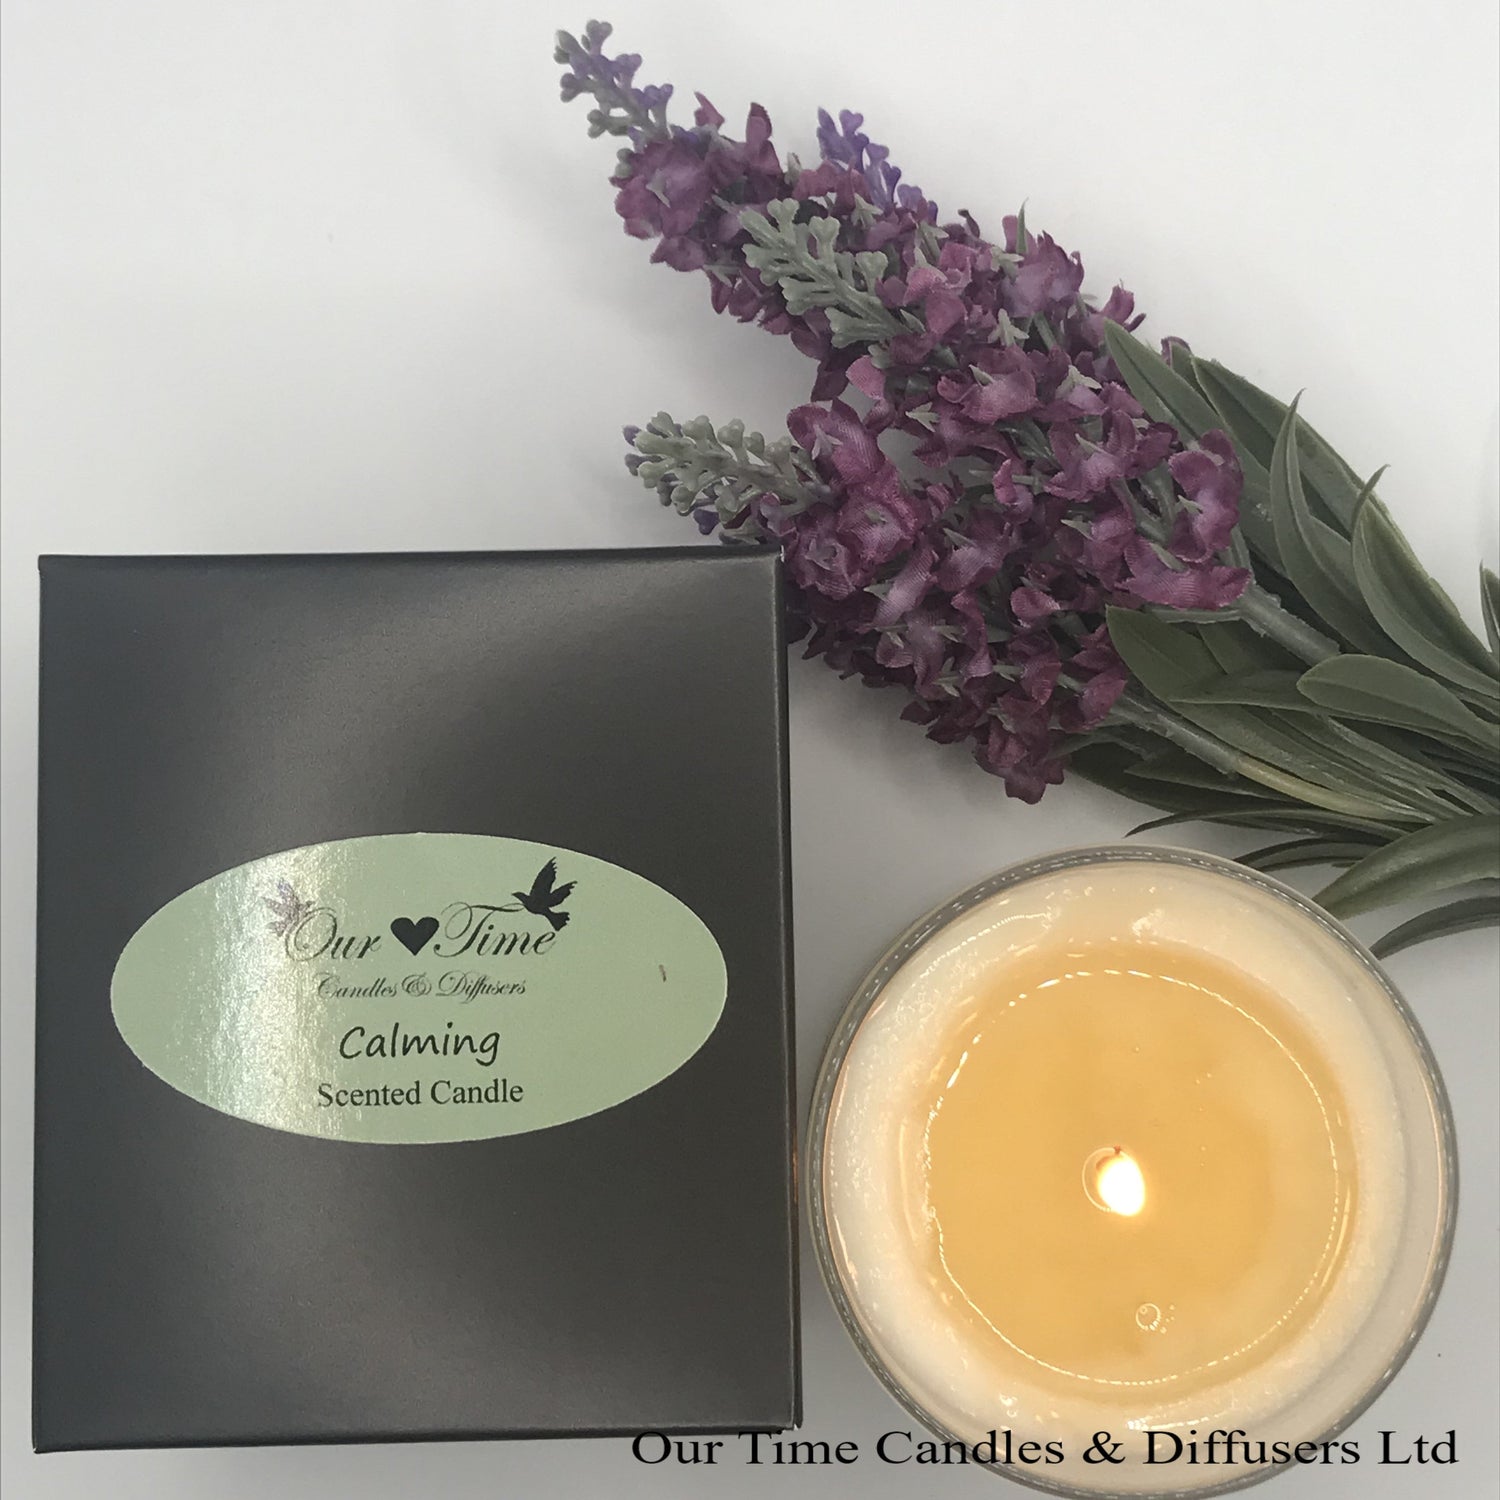 Calming - Our Time Candles and Diffusers